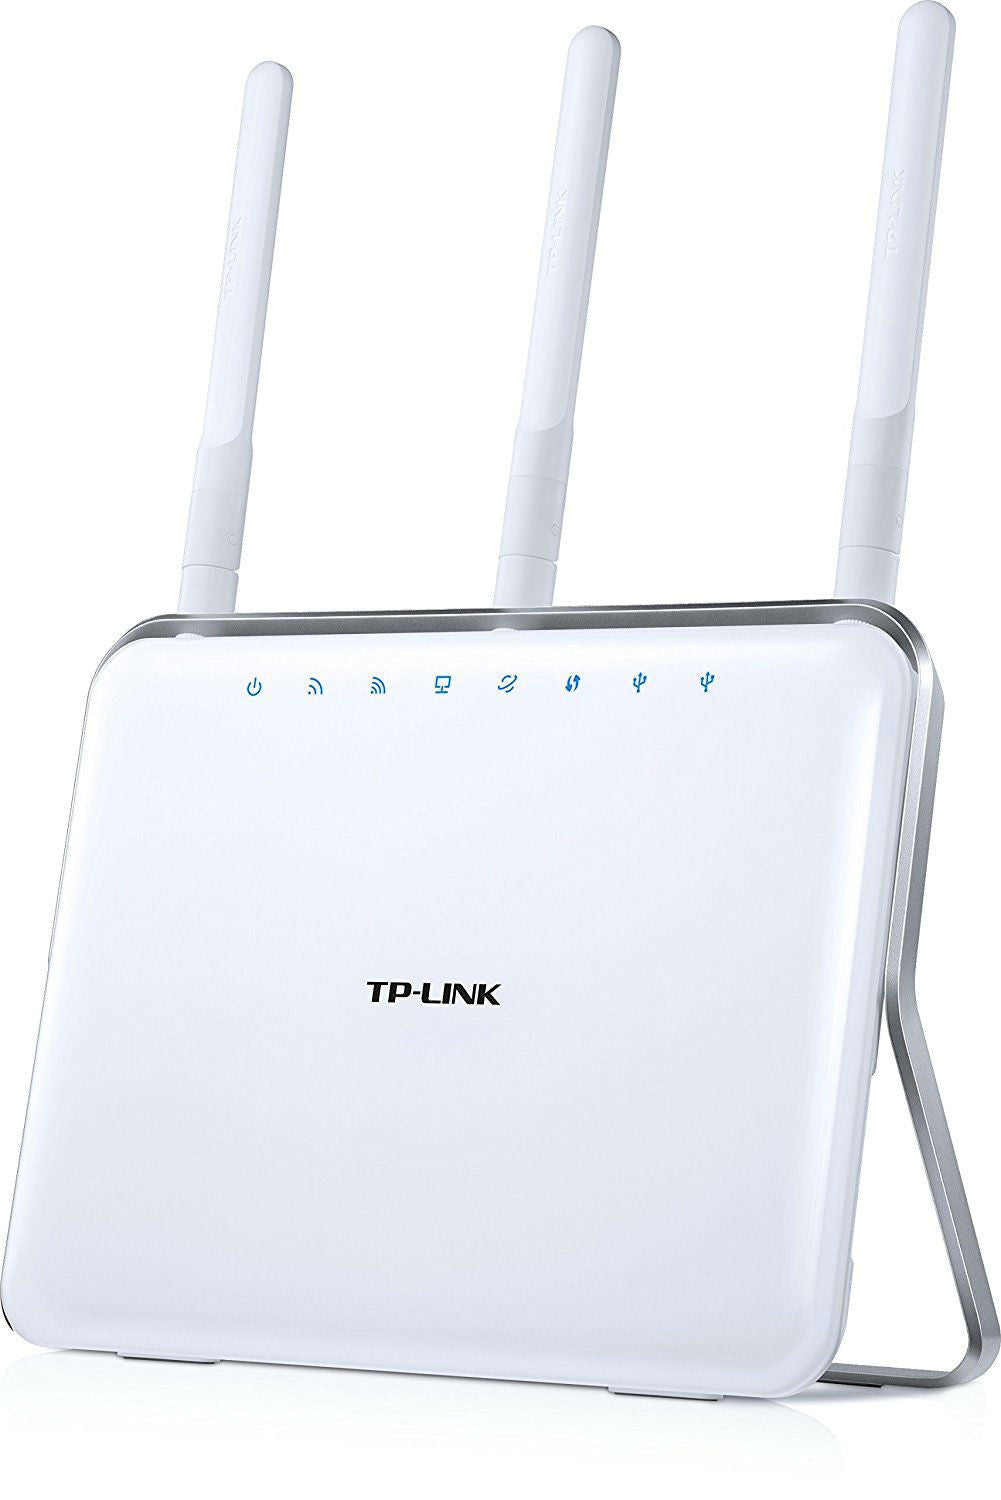 AC1900-Wireless-Dual-Band-Gigabit-Router